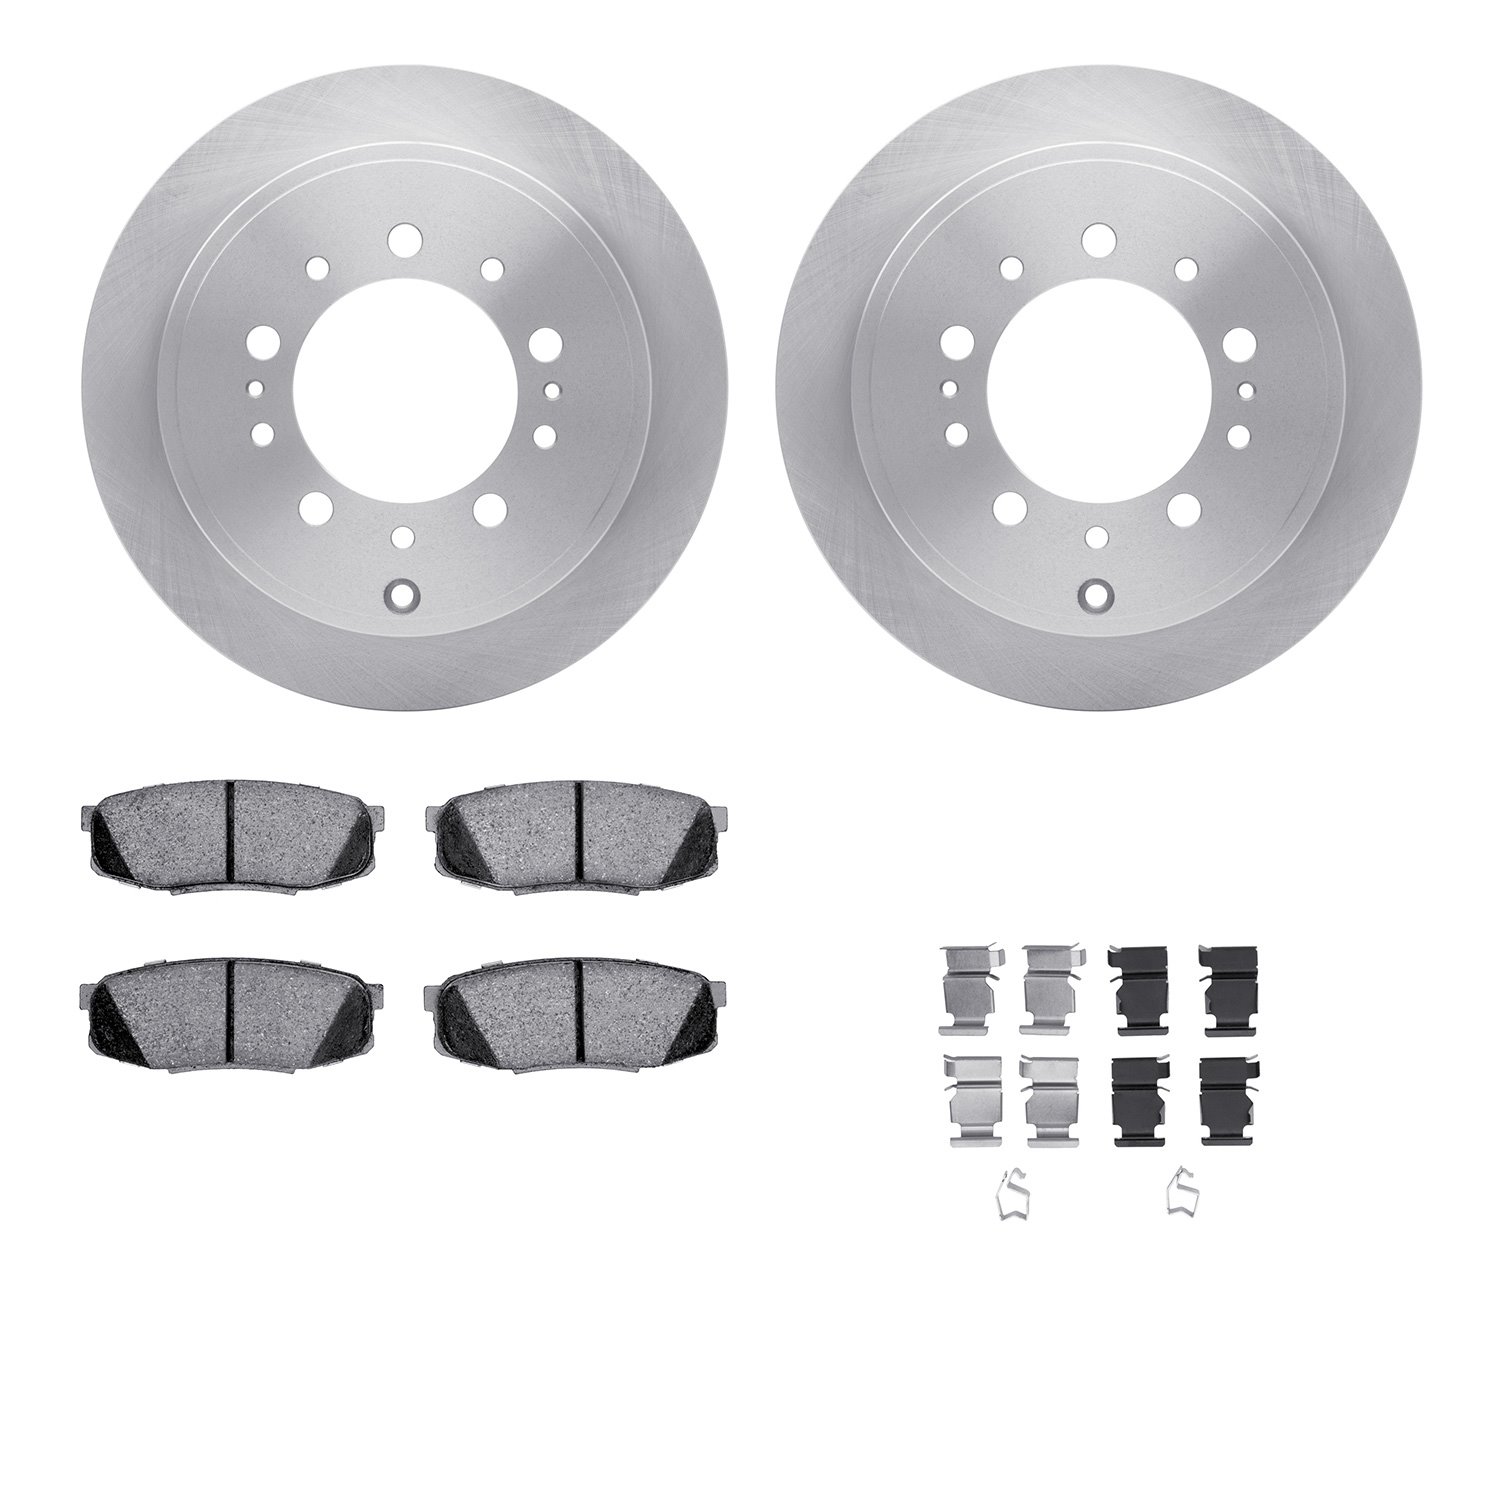 6312-76163 Brake Rotors with 3000-Series Ceramic Brake Pads Kit with Hardware, Fits Select Lexus/Toyota/Scion, Position: Rear